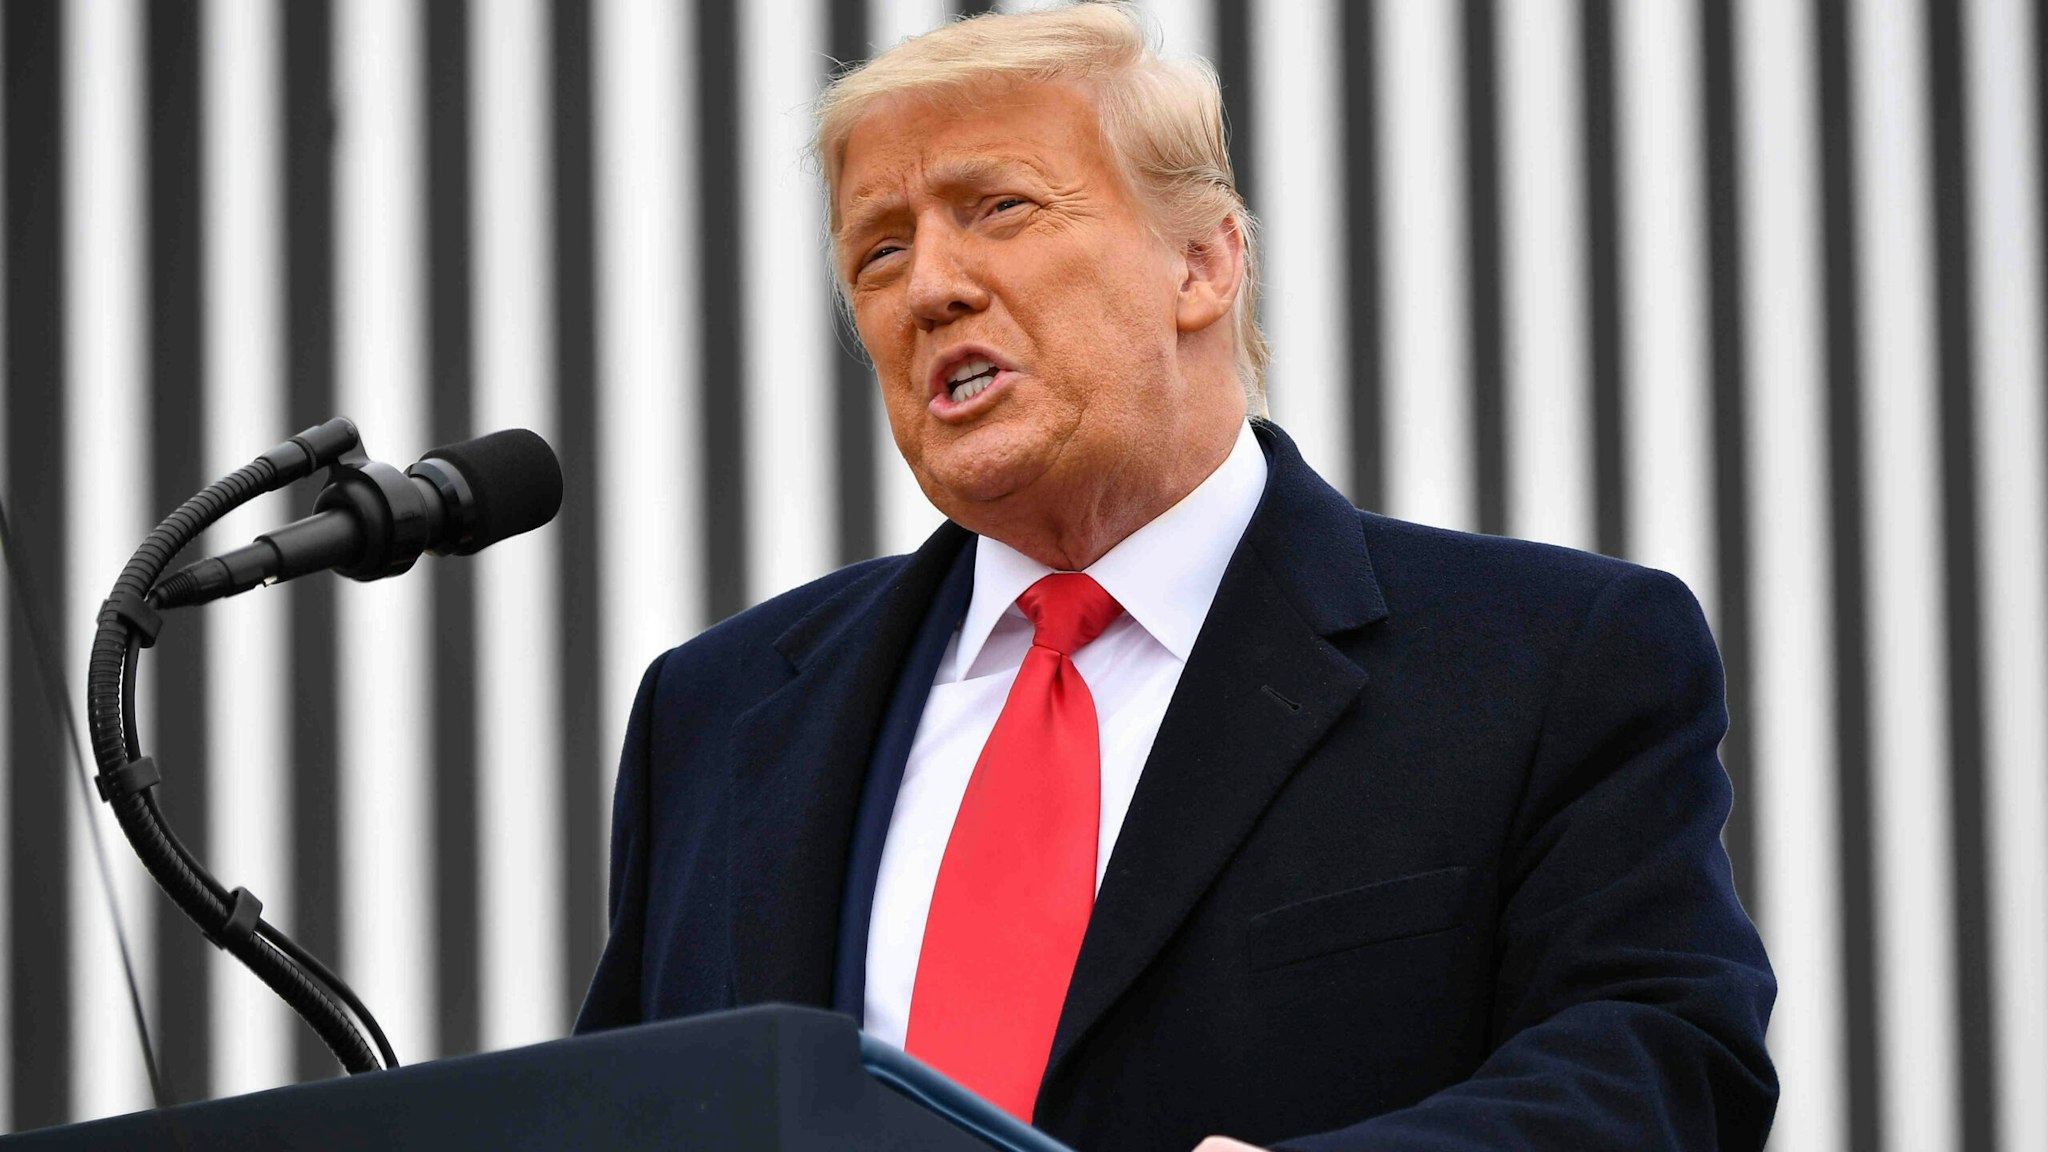 US President Donald Trump speaks after touring a section of the border wall in Alamo, Texas on January 12, 2021.